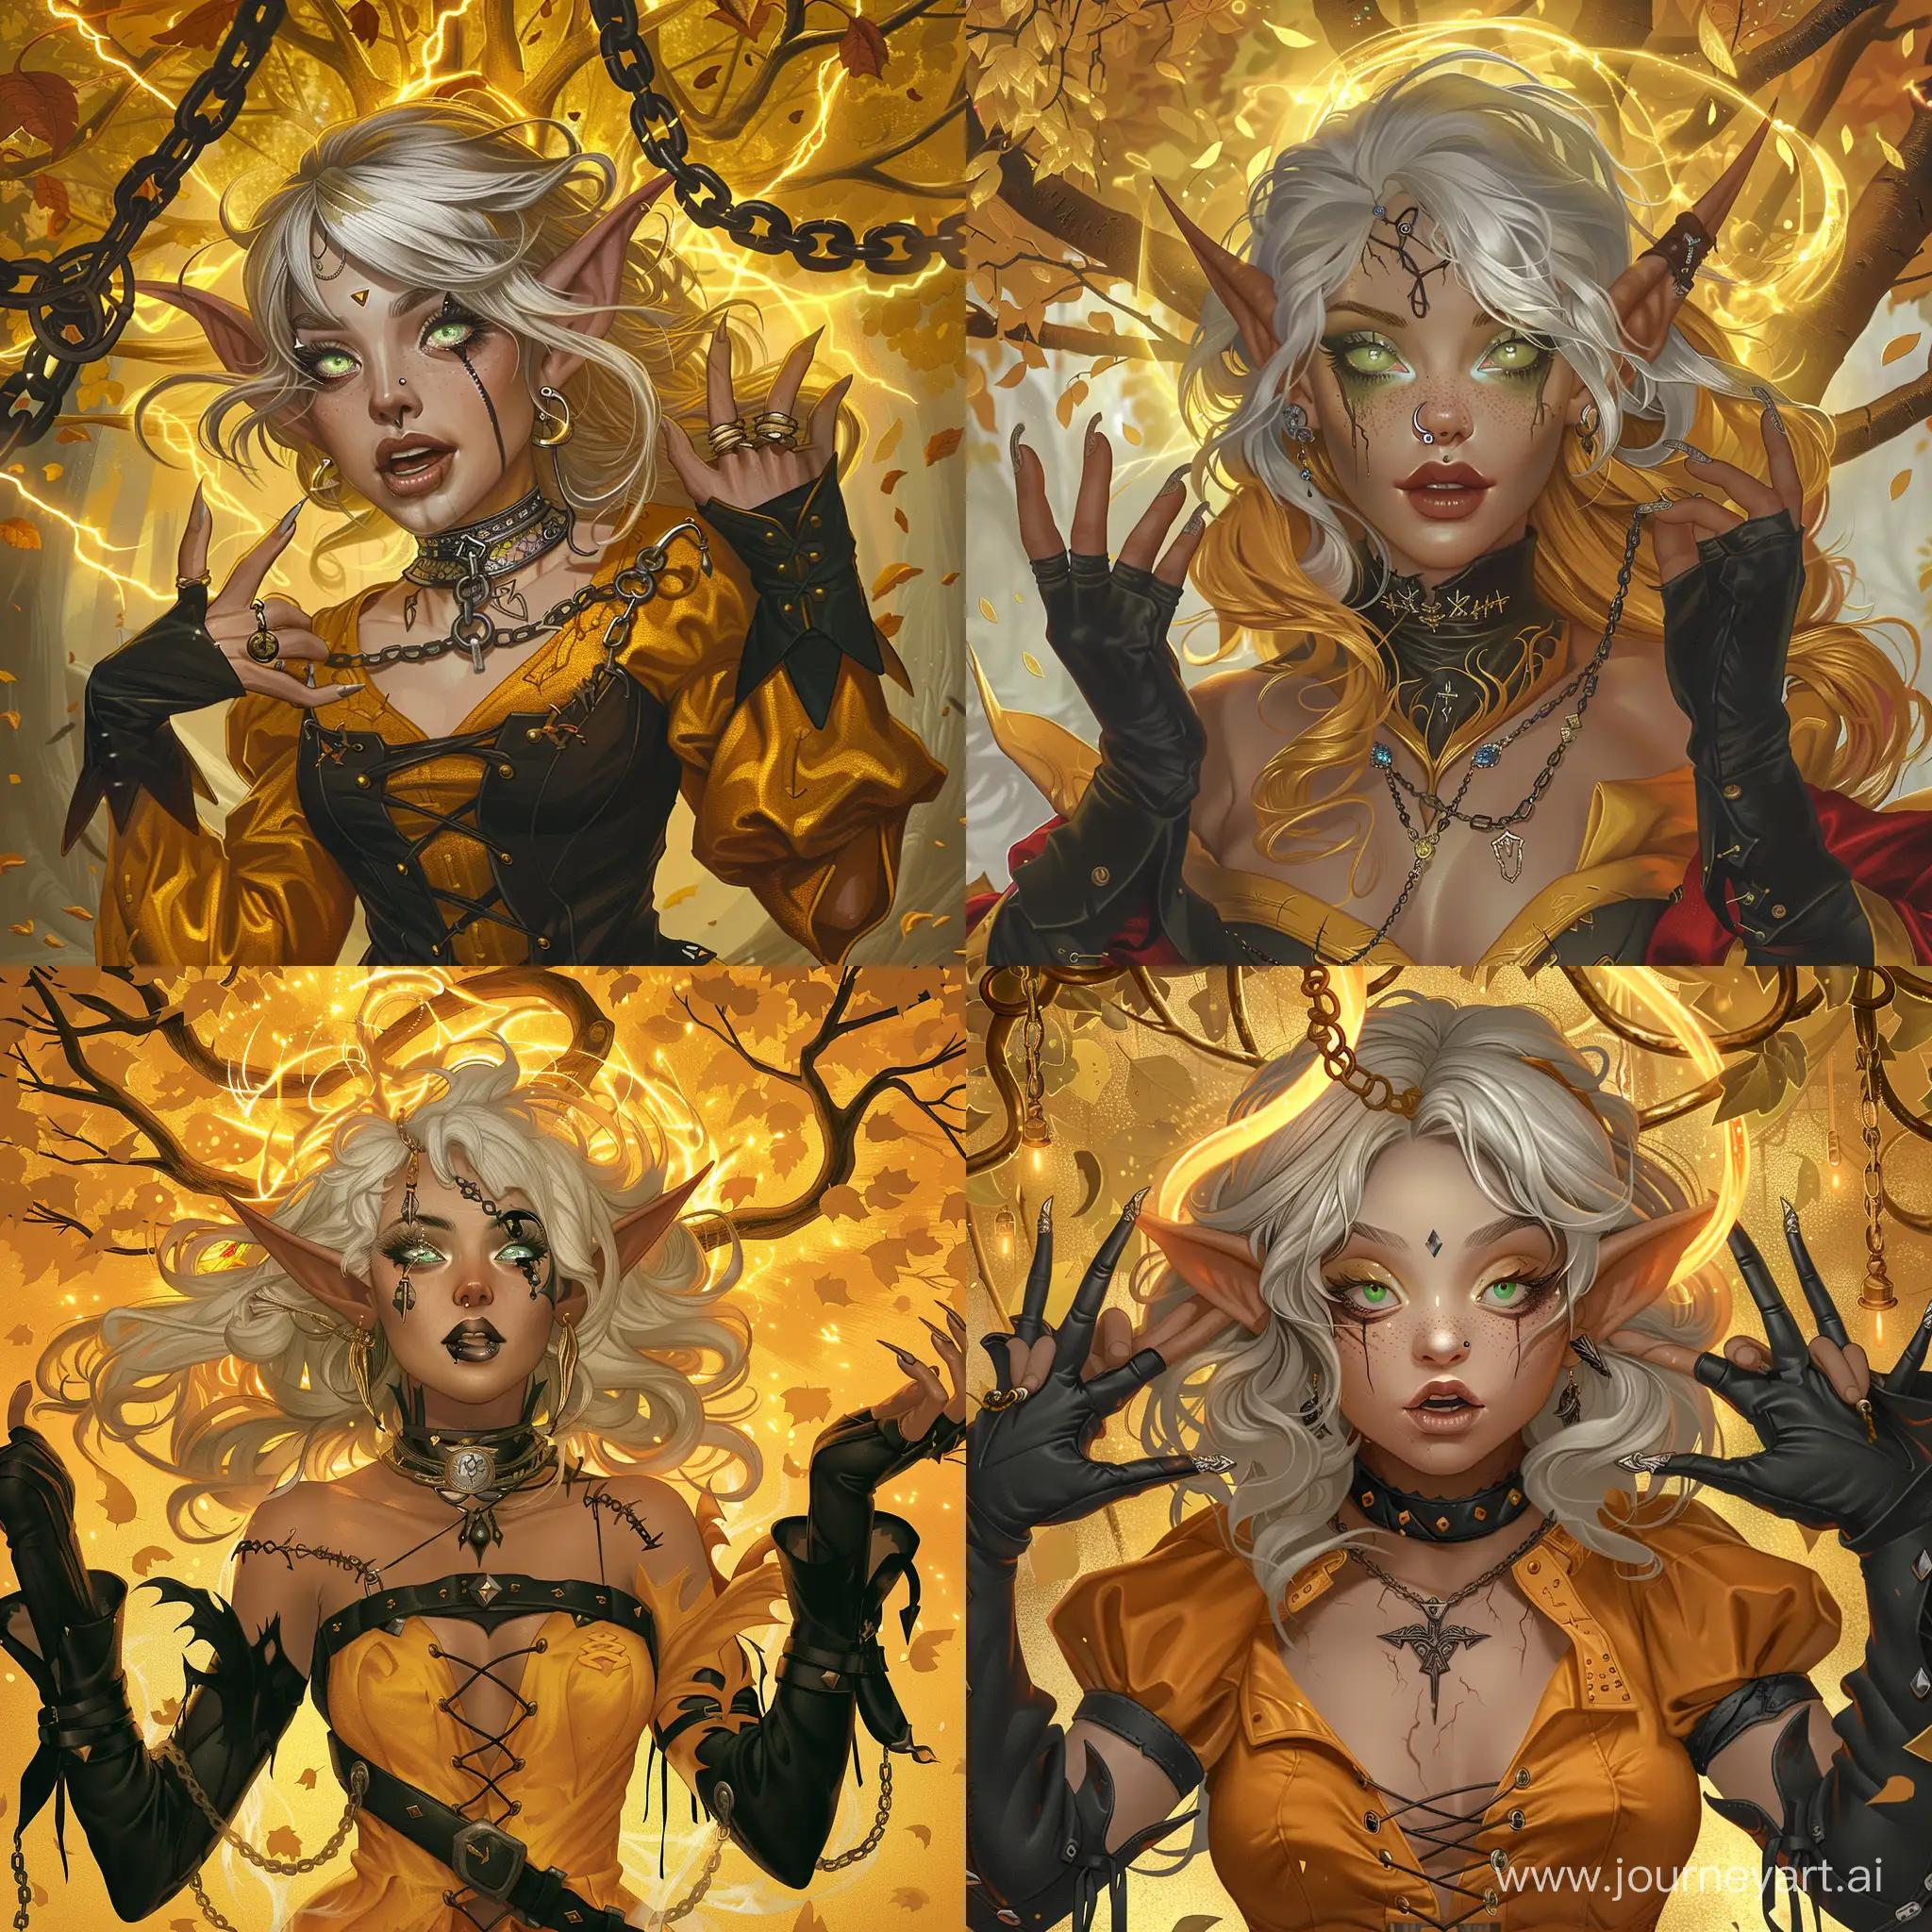 digital art, beautiful woman, with silver green eyes, golden hair with a black lock in the middle of her hair, with medieval clothes stuck to her body, with pointed ears and nose piercing with a chain up to her ear, connecting them, she has powers and is making a sign for everyone to bow to her, under a golden tree, while her power swirls over her like mist, semi-realistic, you can make her full body, in medieval thief clothes, wearing black high-heeled boots, make her do some symbol of witchcraft or some symbol of some legend or mythology and culture of Oceania